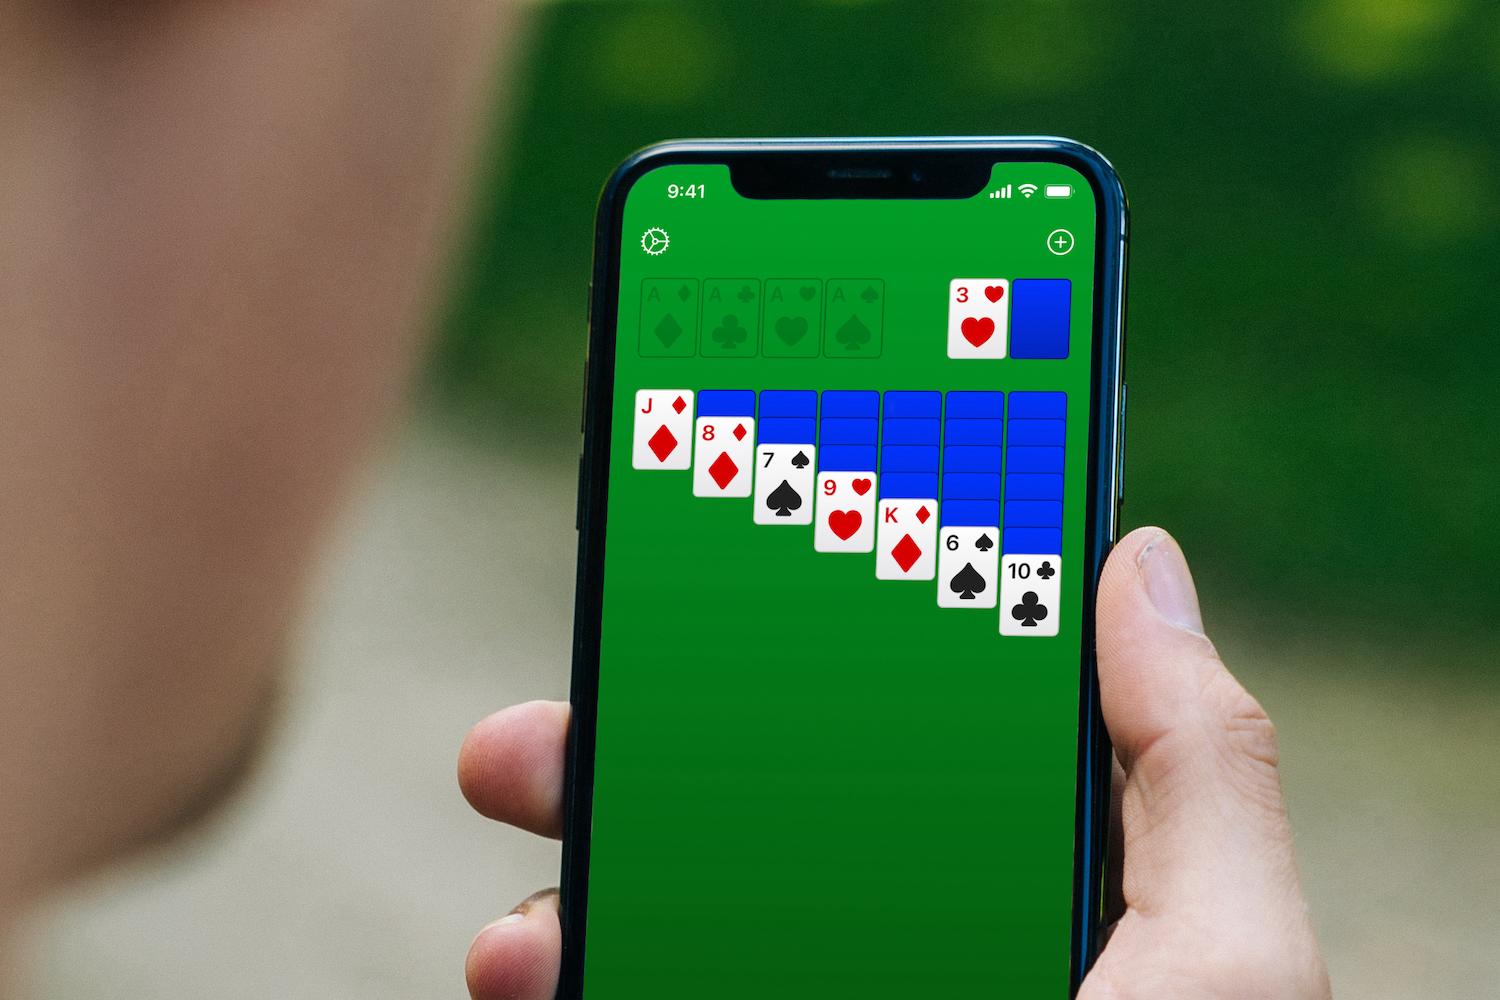 Hand holding an iPhone with Solitaire open